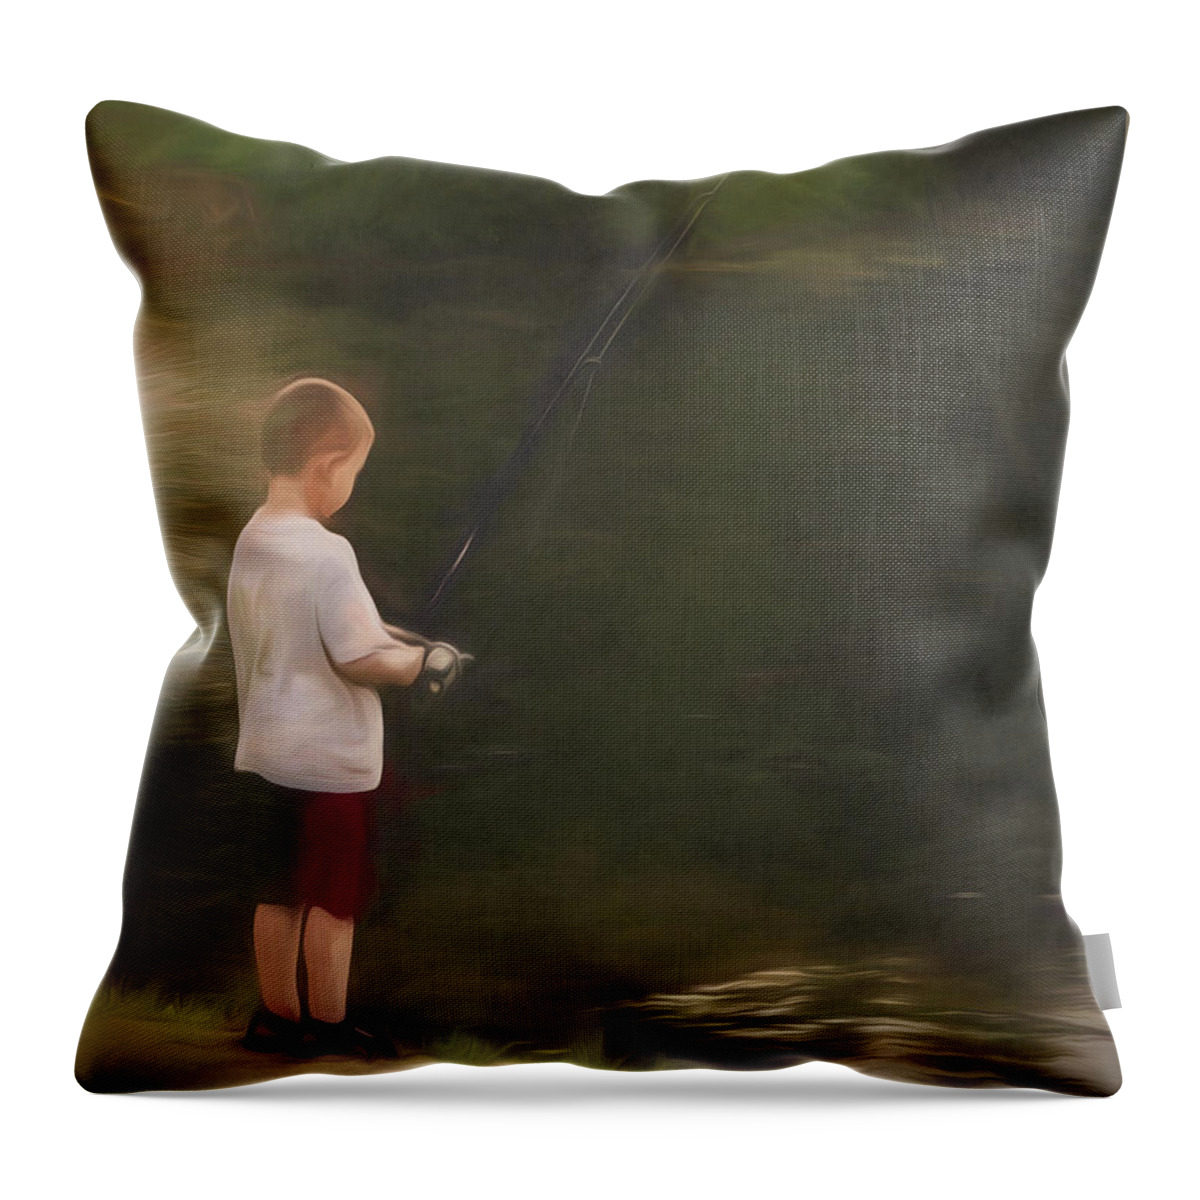 Fishing Throw Pillow featuring the photograph Little Boy Fishing by Jason Fink